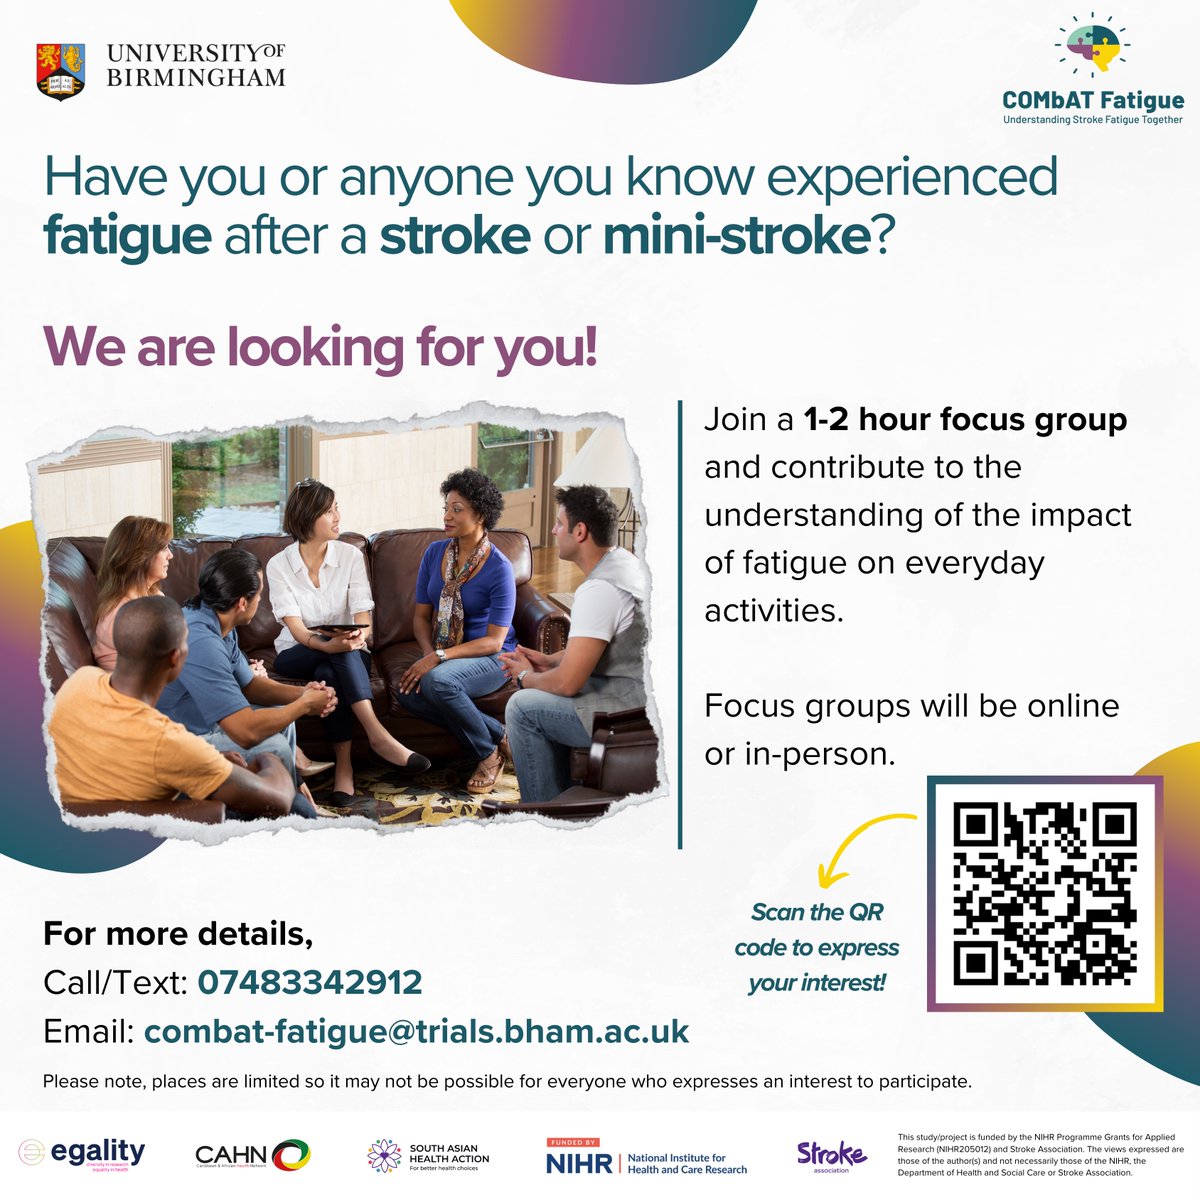 The COMbAT Fatigue study is developing a program to help with post-stroke fatigue. Your input is essential! Participants receive £25. Join us: bit.ly/3Uy0Yoo #StrokeResearch